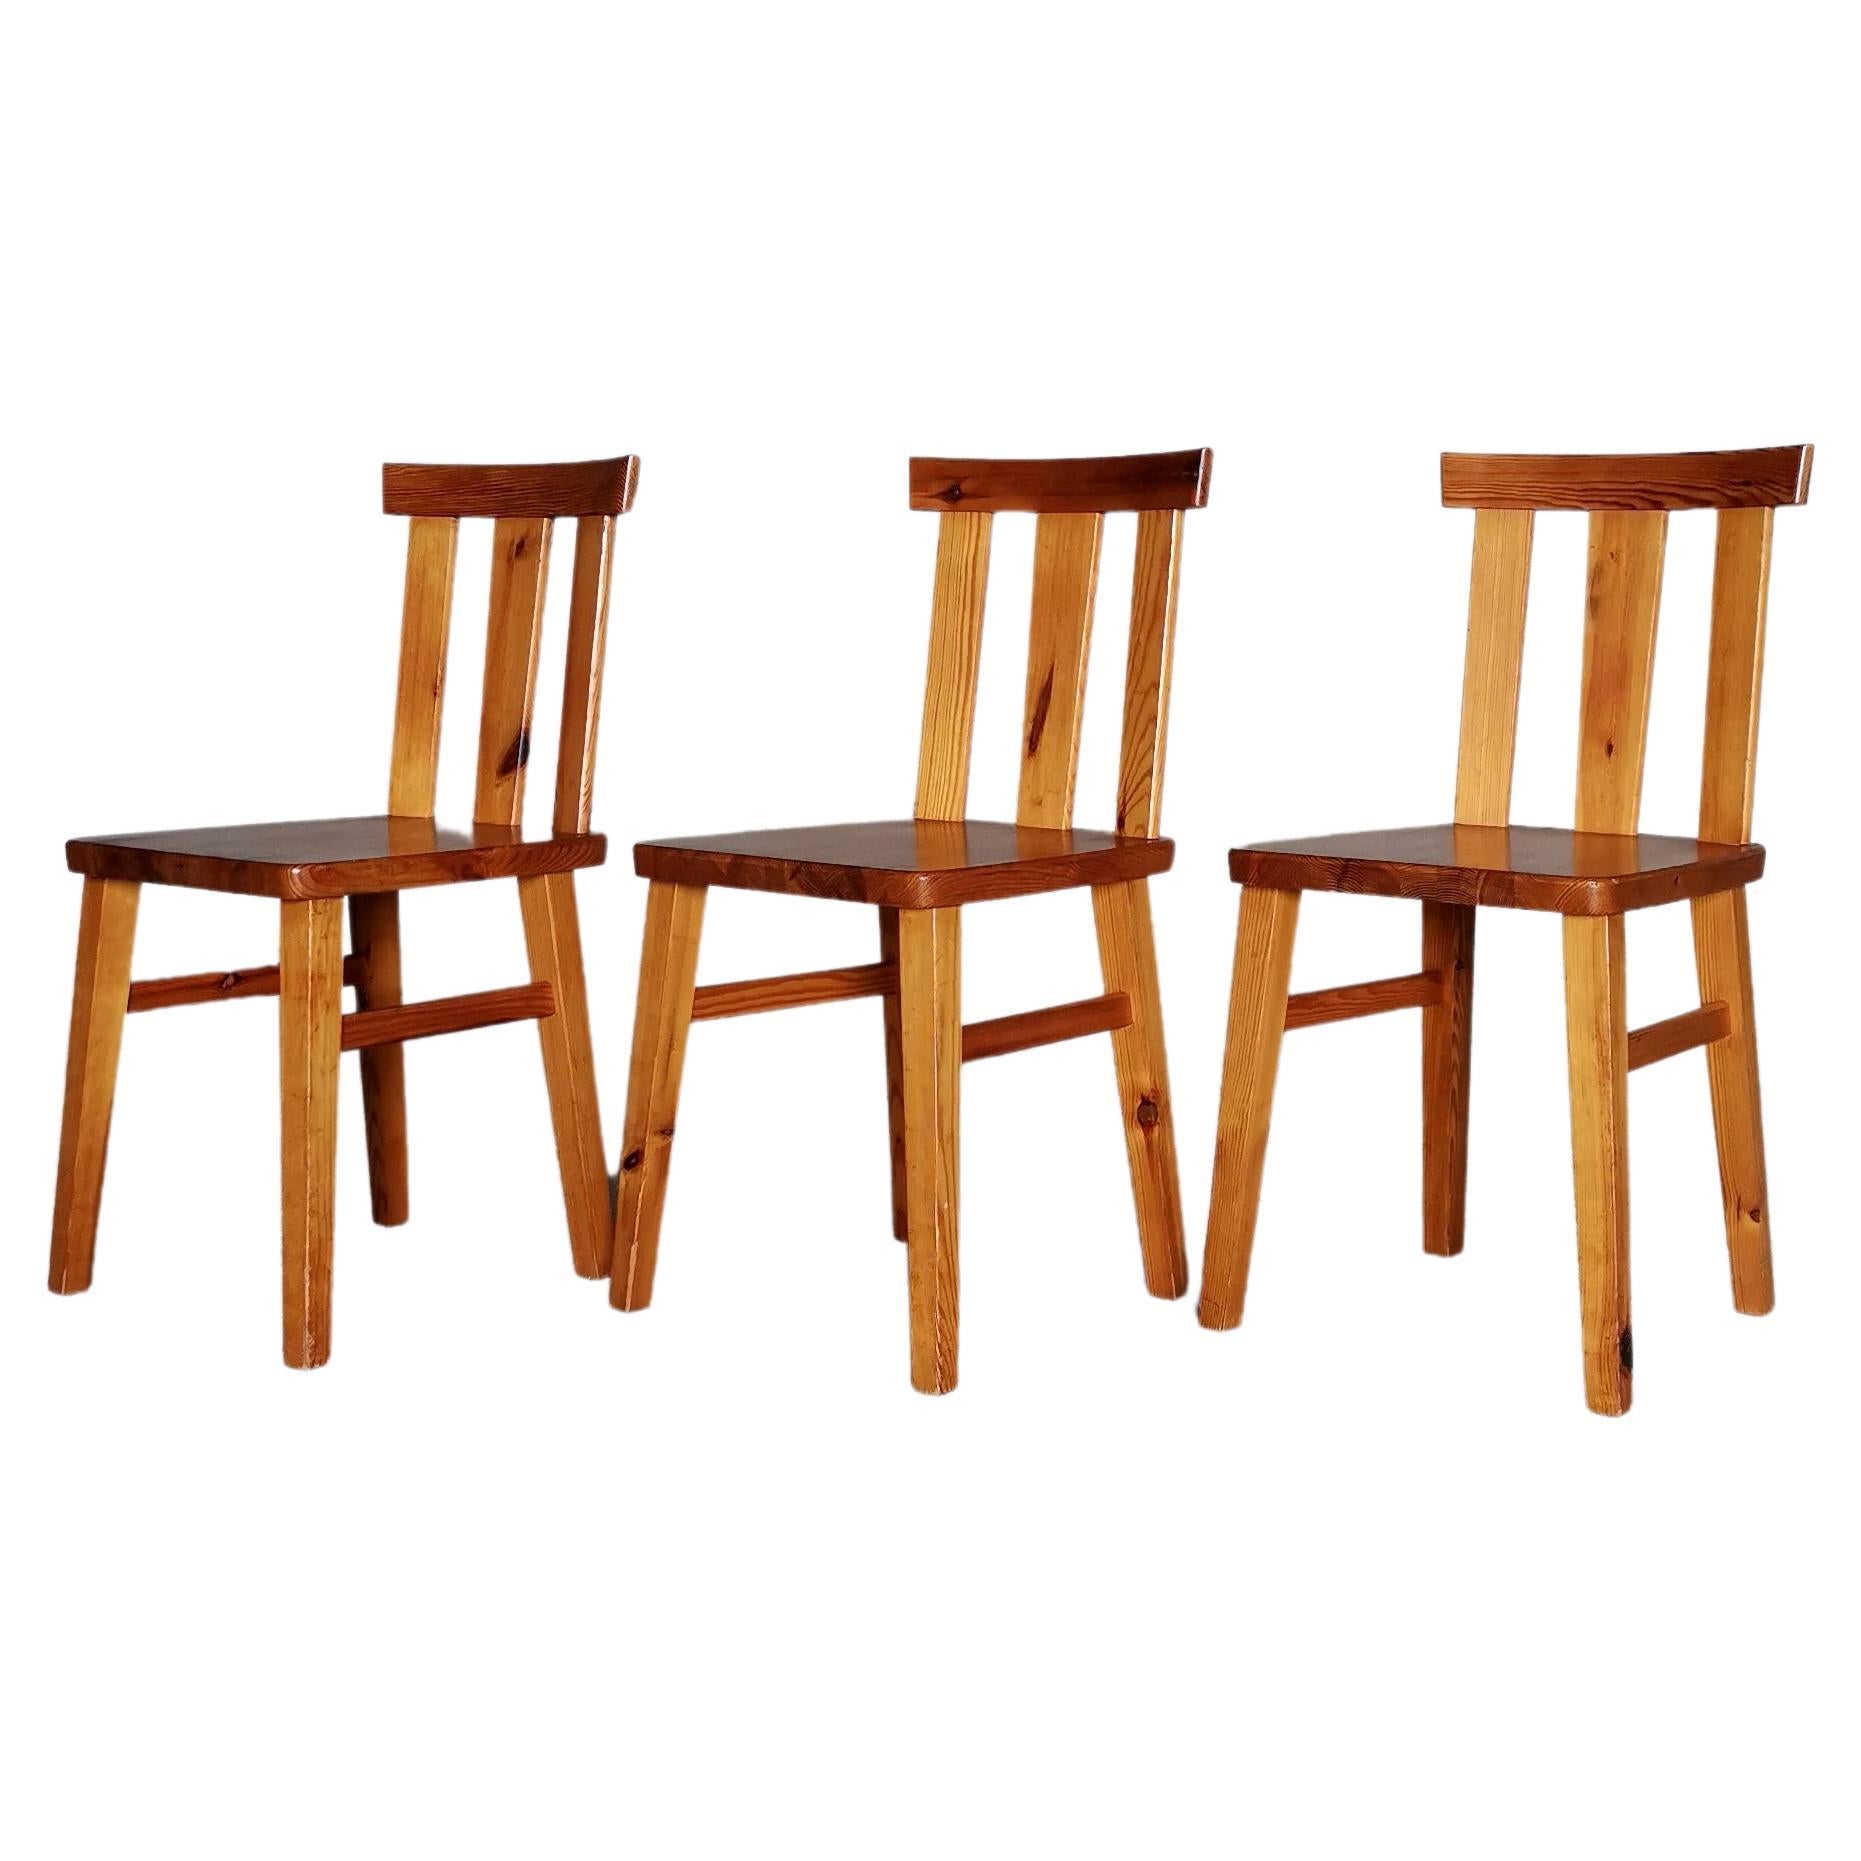 Set of 3 dining chairs in solid pine, style of Axel Einar Hjorth, Sweden 1930s For Sale